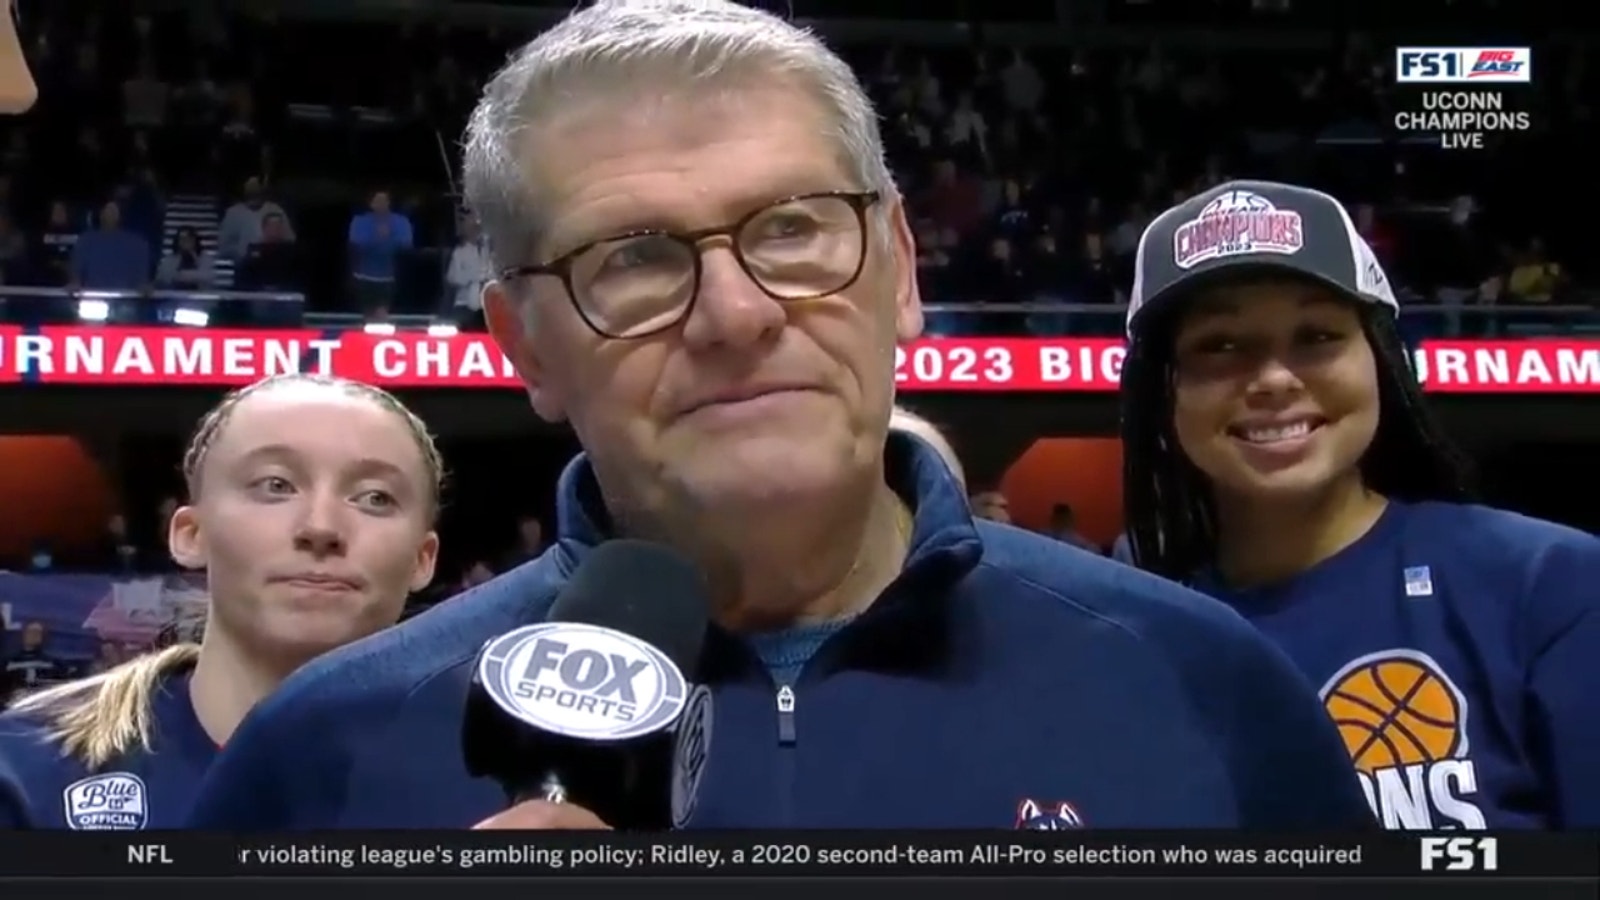 UConn coach Geno Auriemma on the Huskies capturing the Big East championship: 'These kids know when it's March time'